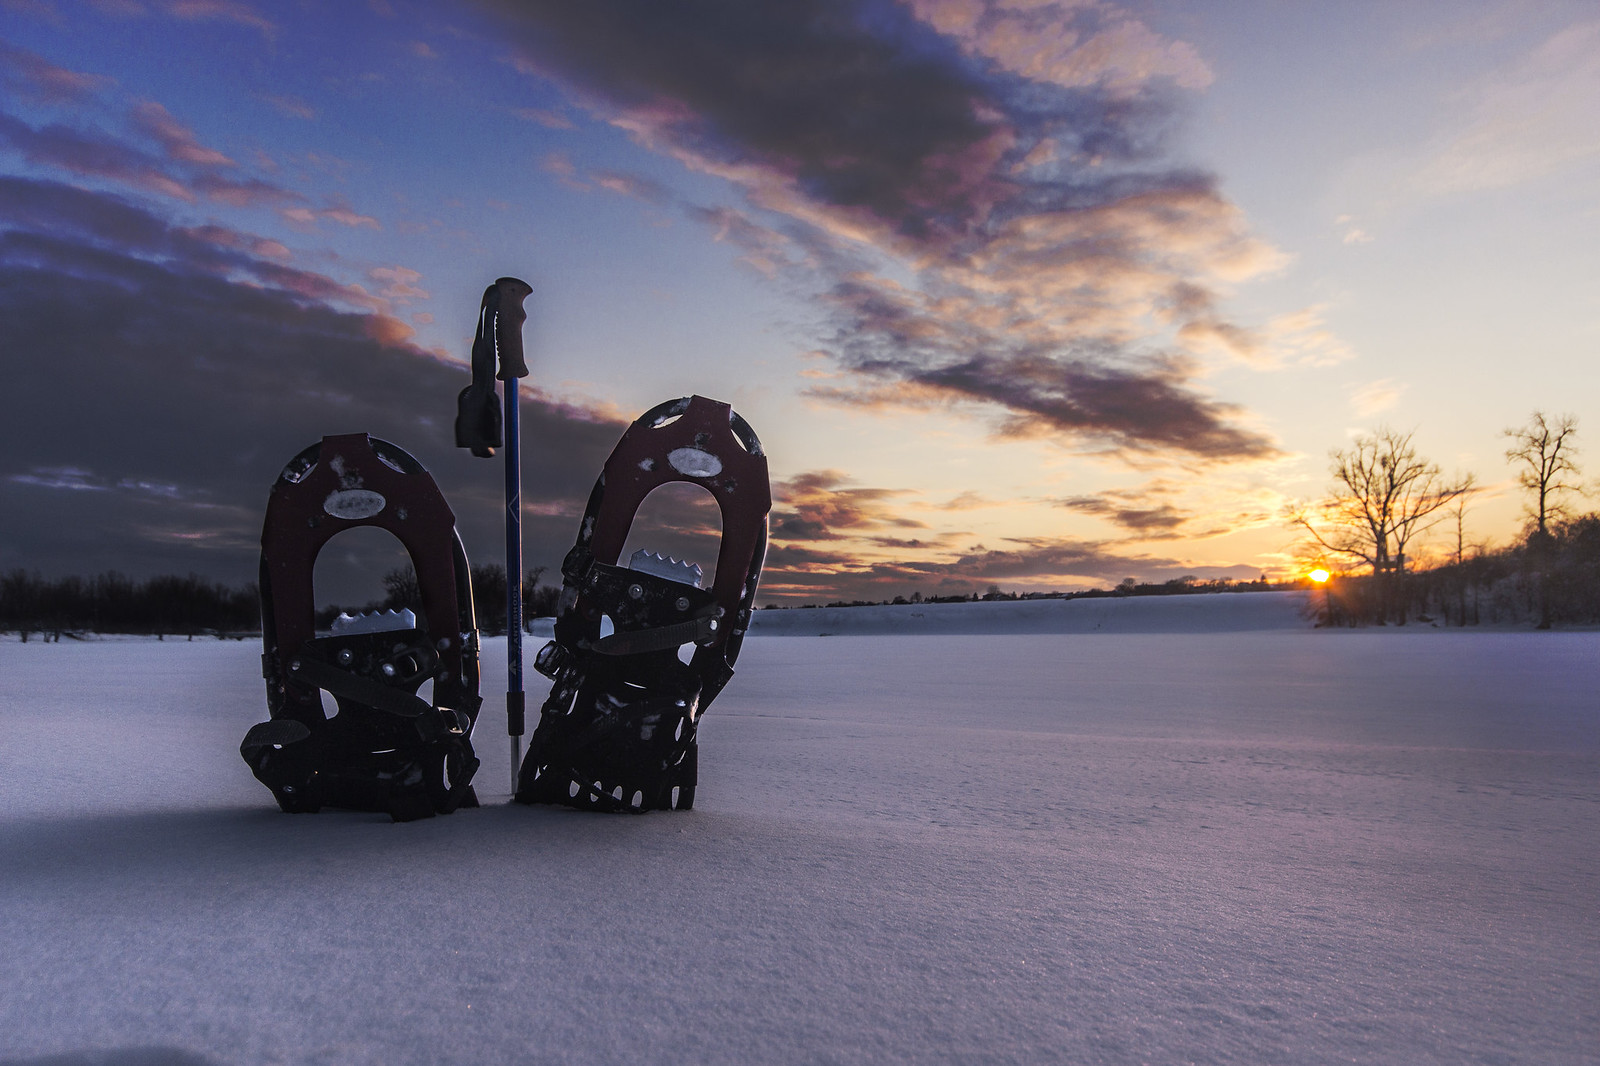 Snow Rackets at sunset